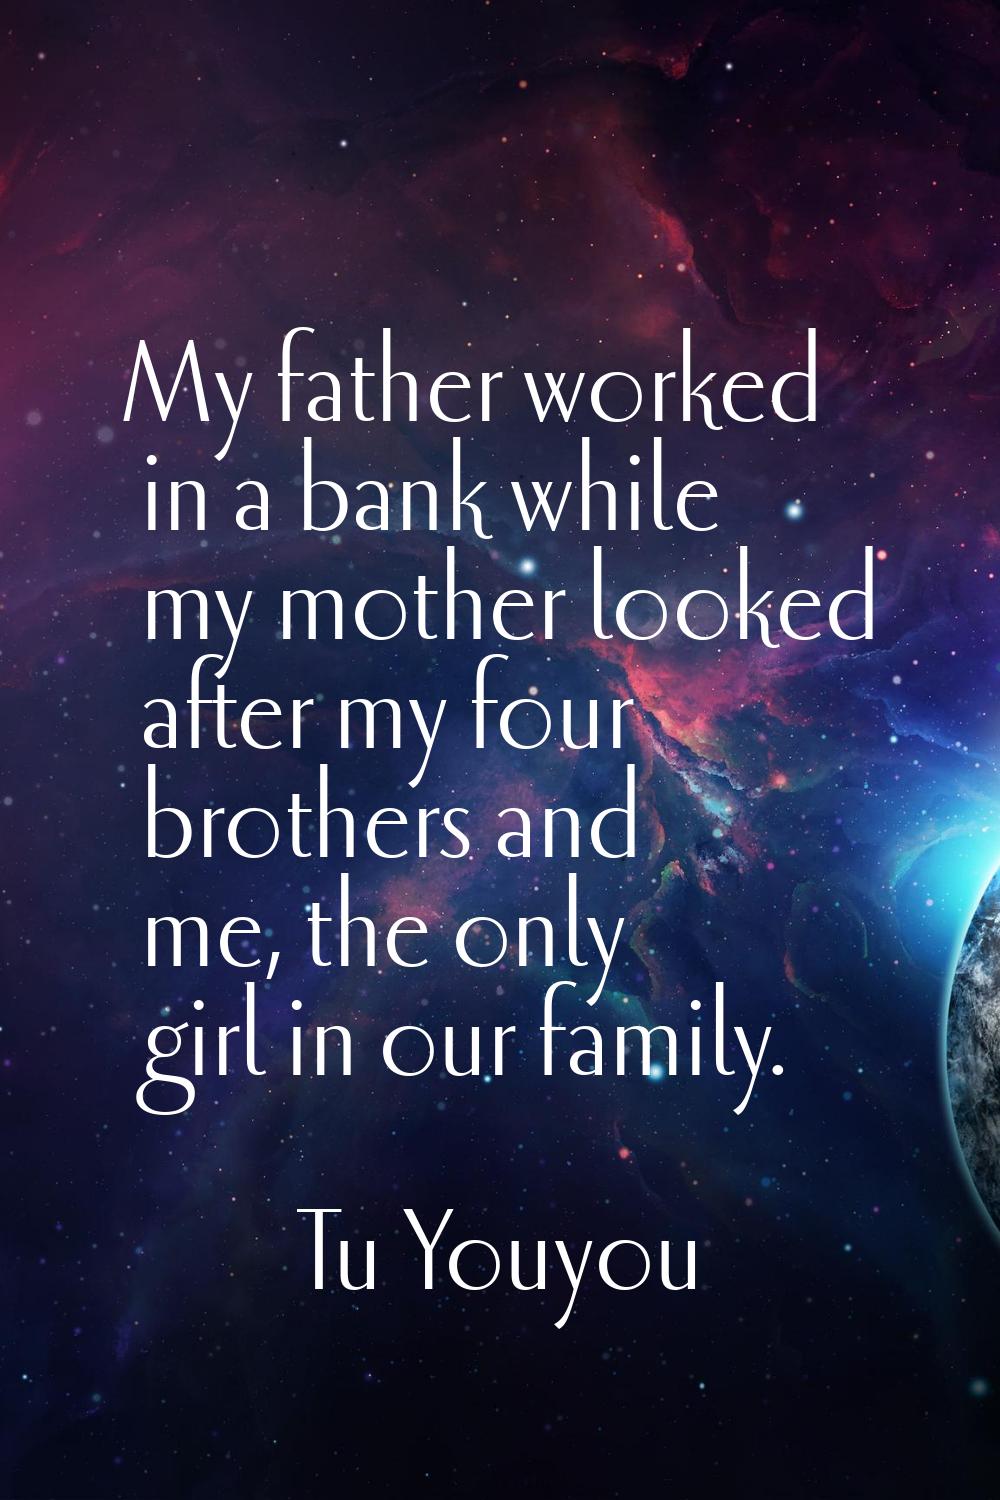 My father worked in a bank while my mother looked after my four brothers and me, the only girl in o